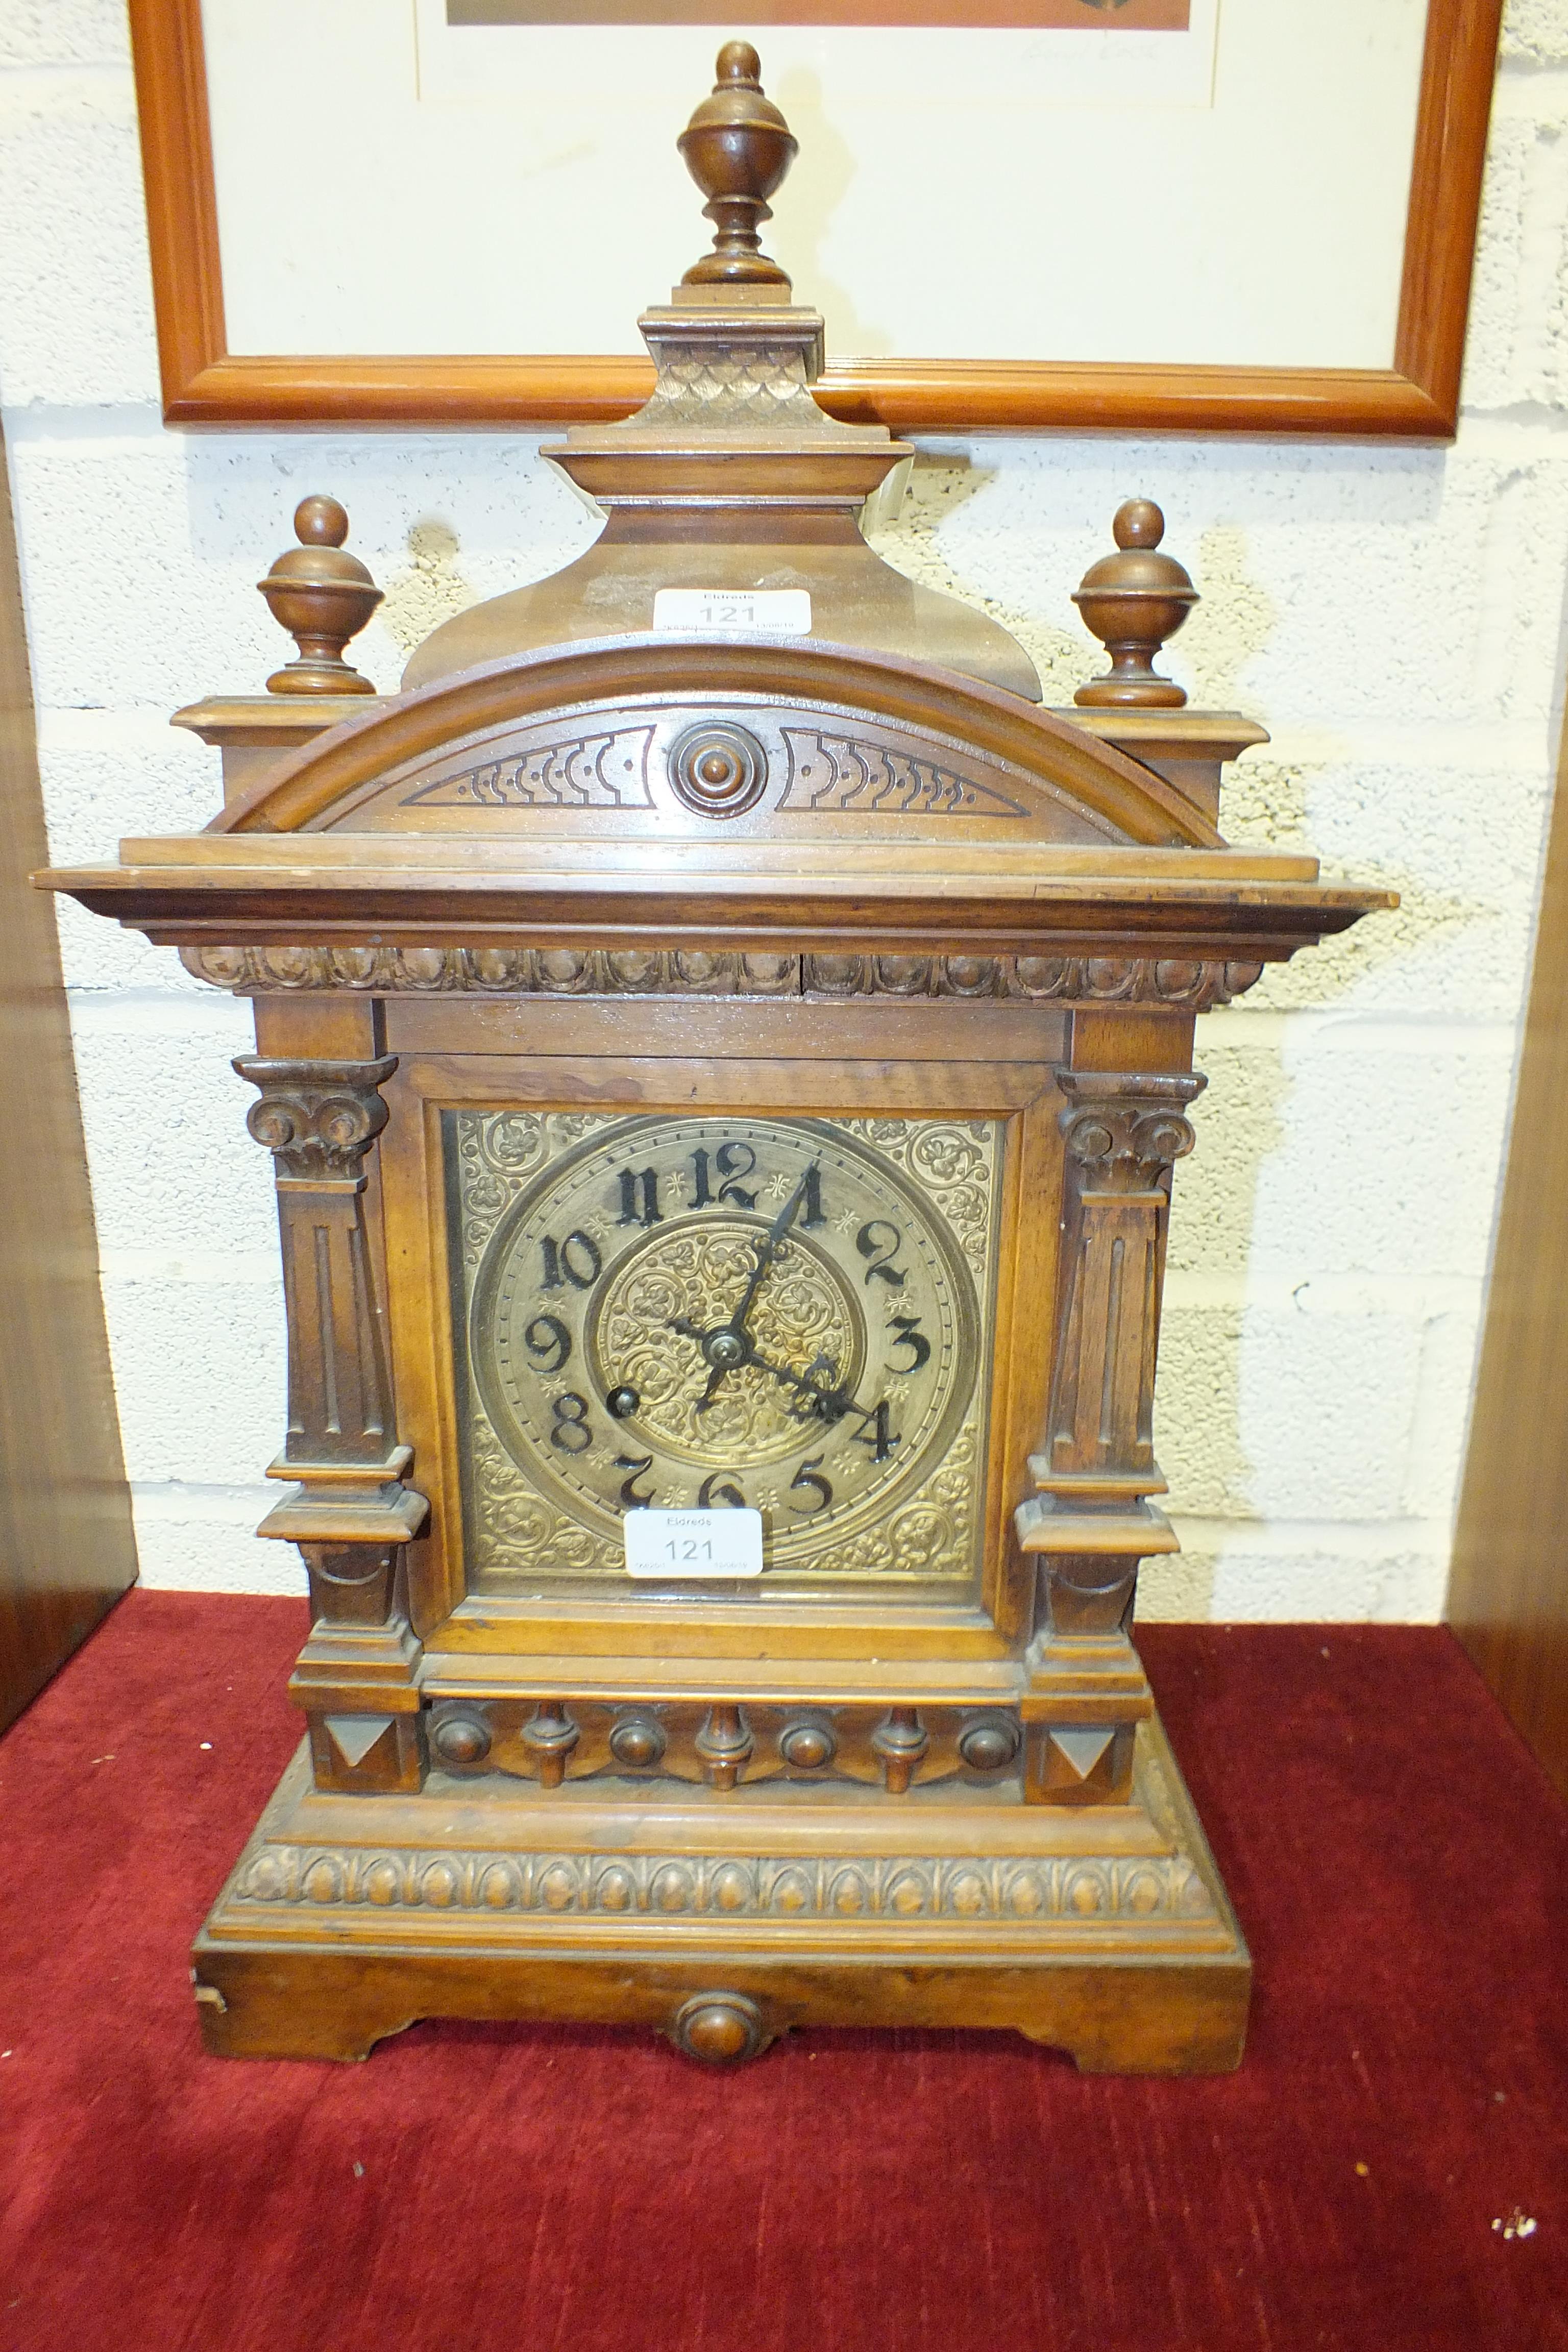 A walnut-cased mantel clock of architectural form with brass dial, the movement striking on a